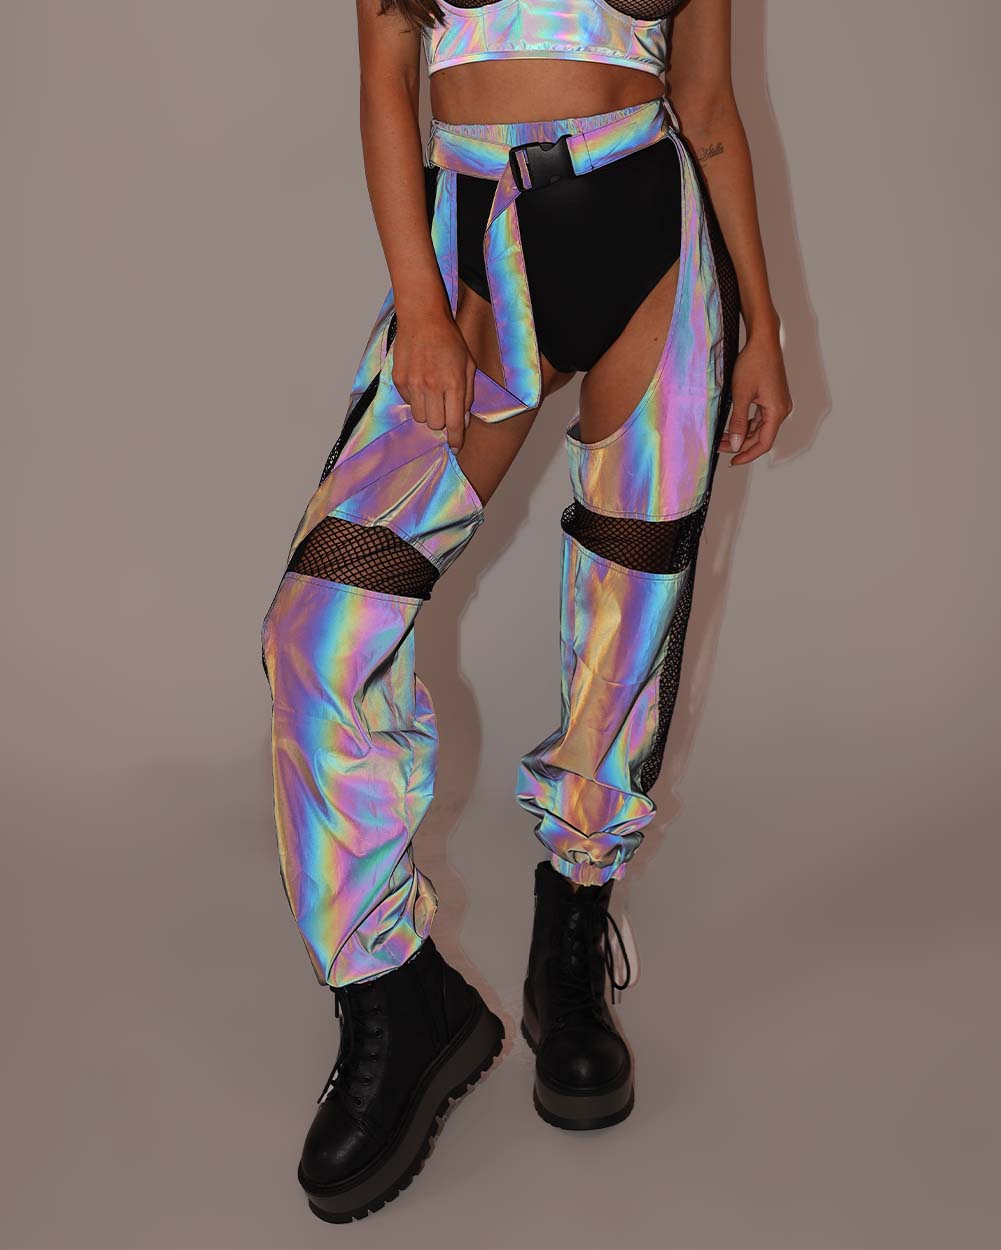 Women's Rave Outfits, EDM Outfits